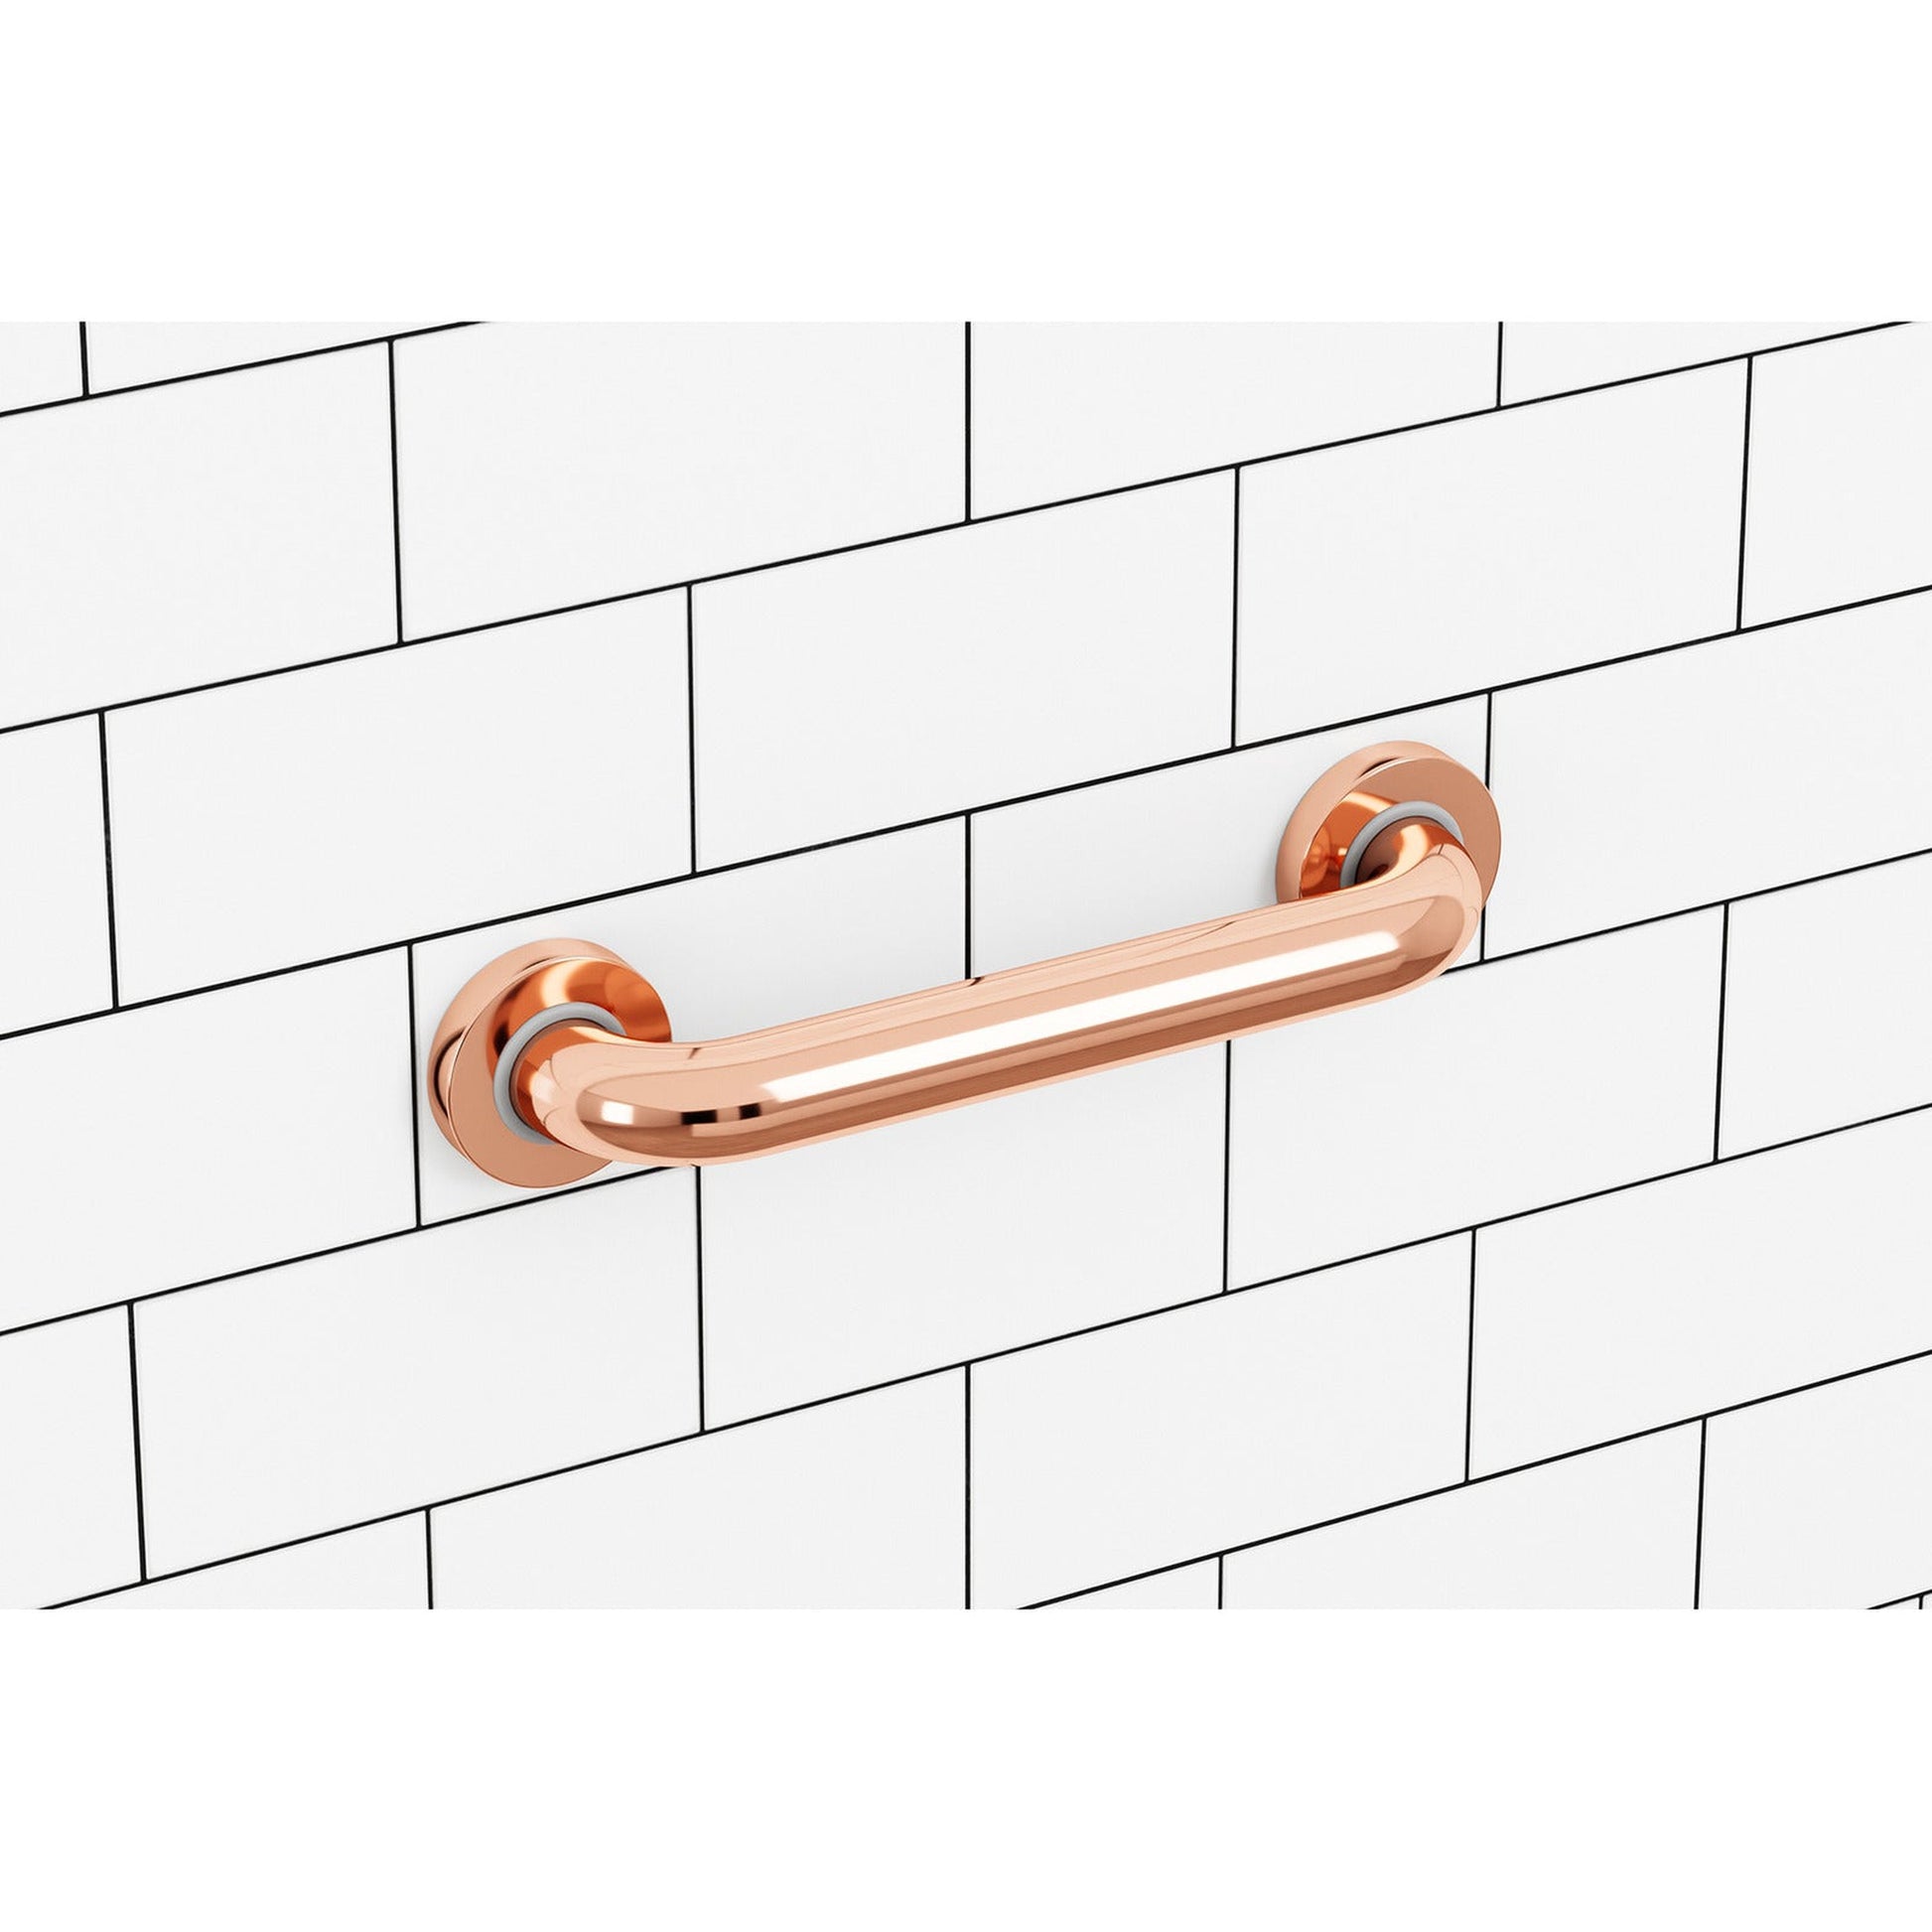 Evekare 12" x 1.5" Stainless Steel Concealed Mount Grab Bar in Rose Gold